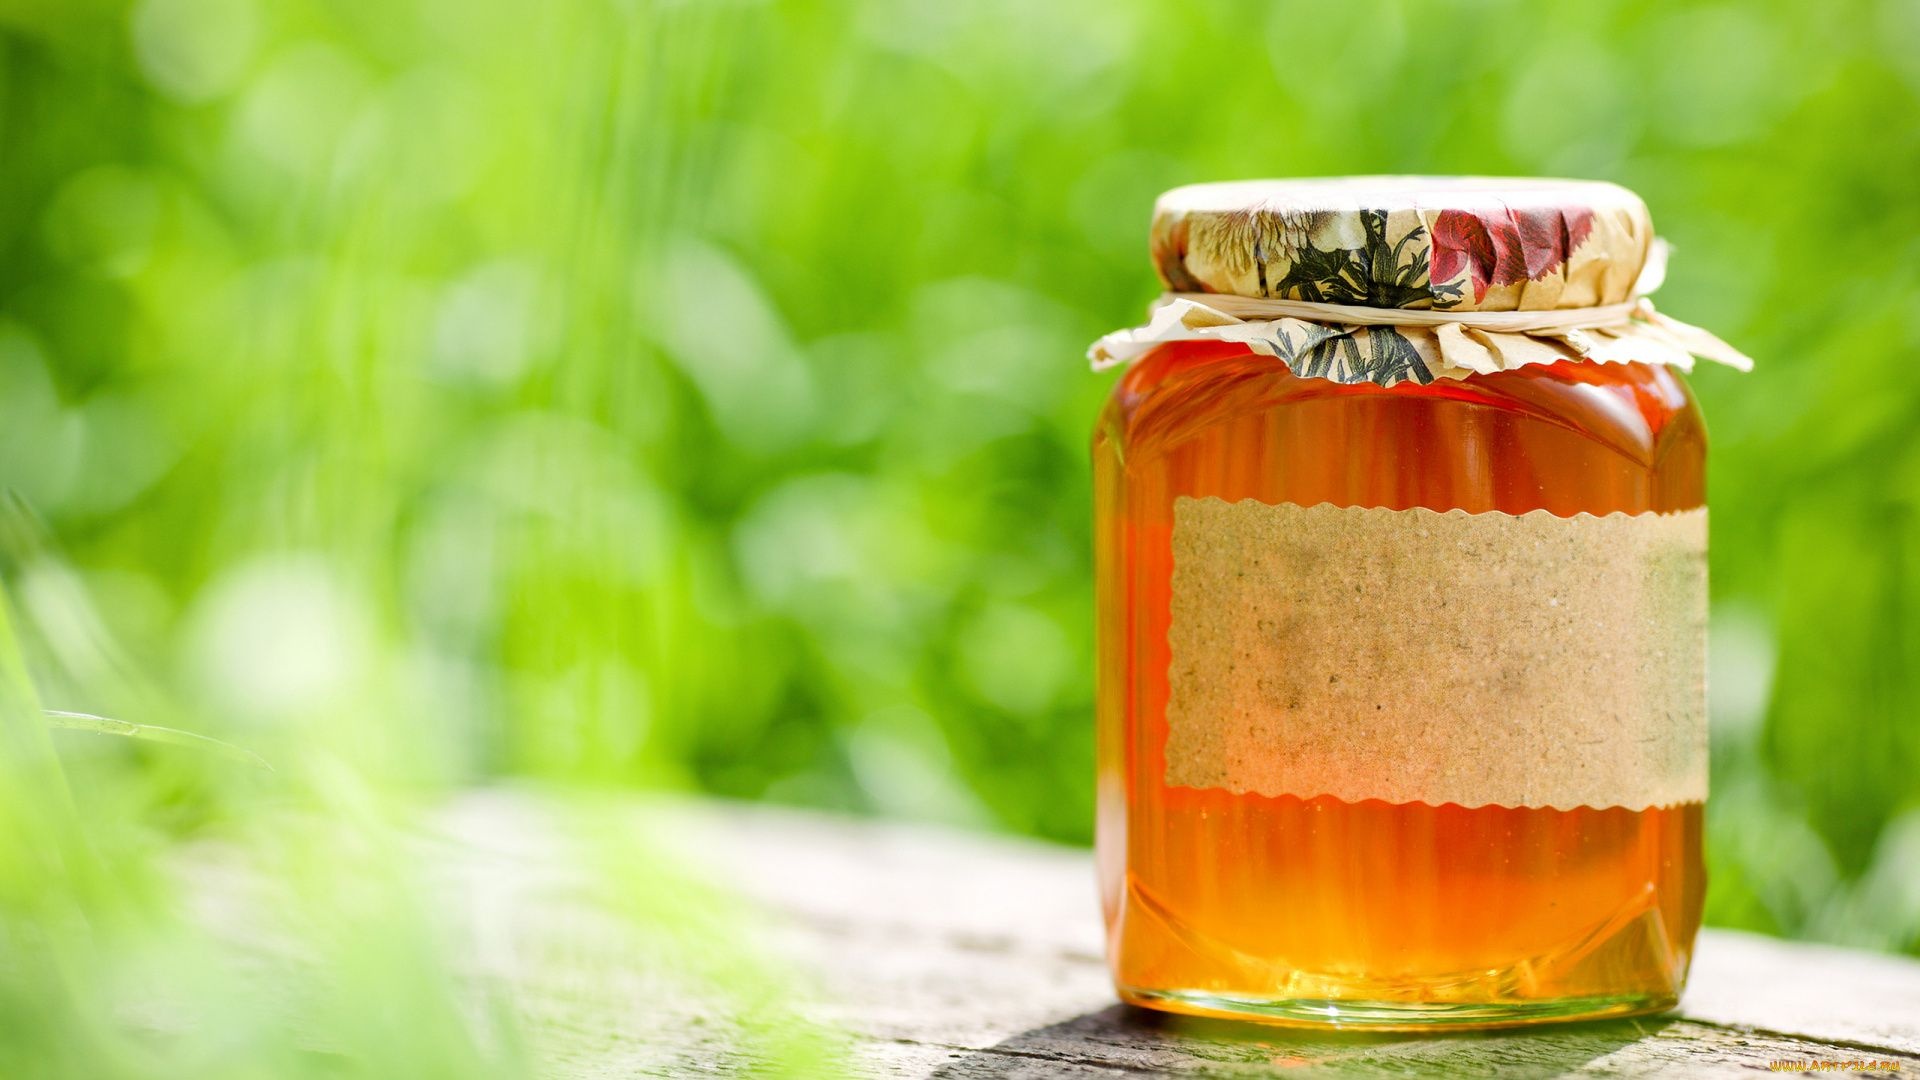 Honey: One of the most easily assimilated foods. 1920x1080 Full HD Background.